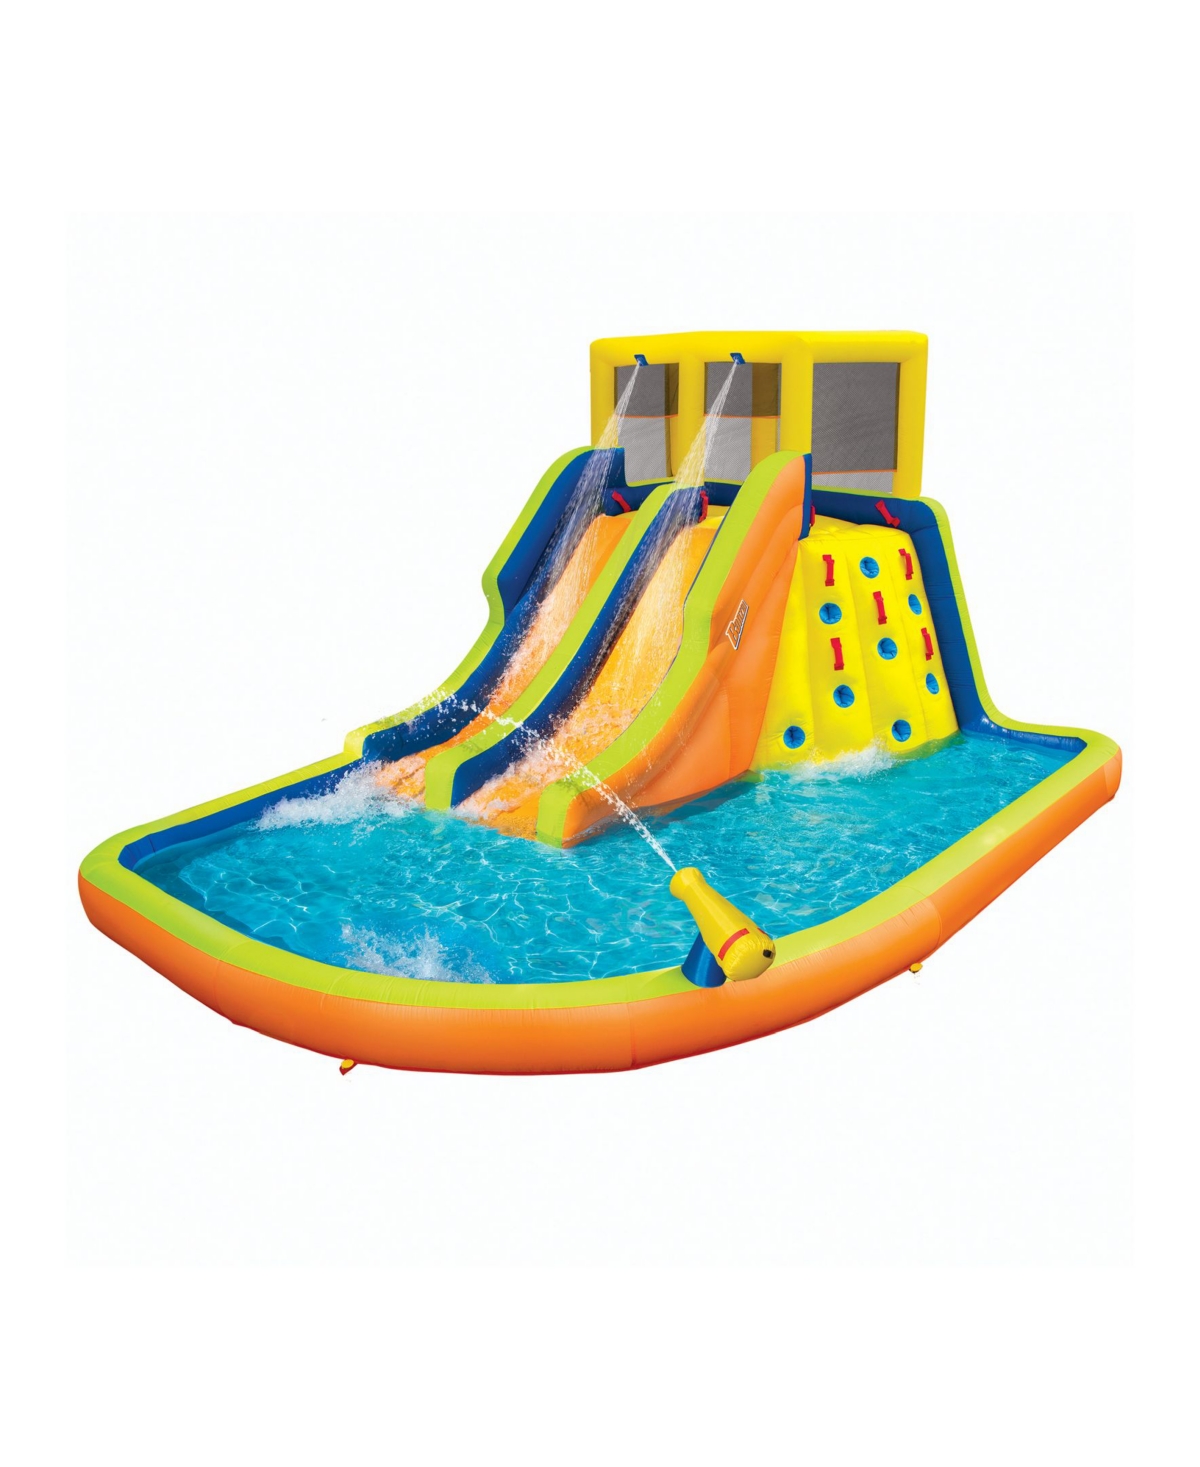 Banzai Double Drench Water Park Outdoor Toy In Multi